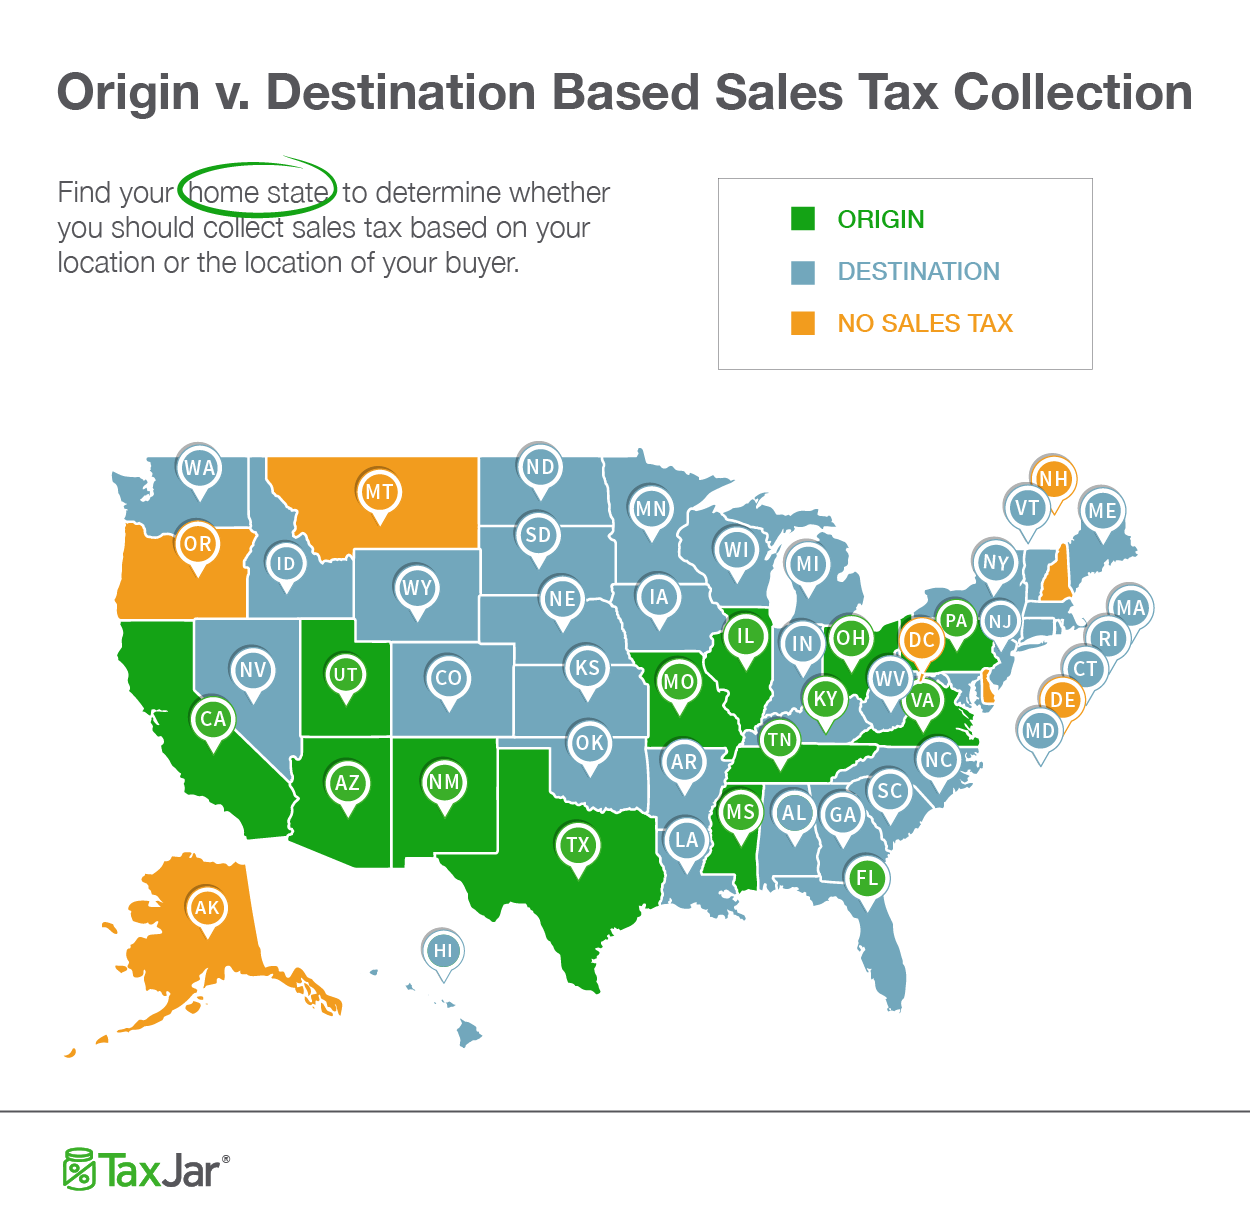 A map showing which states ask for origin vs. destination-based tax charges.